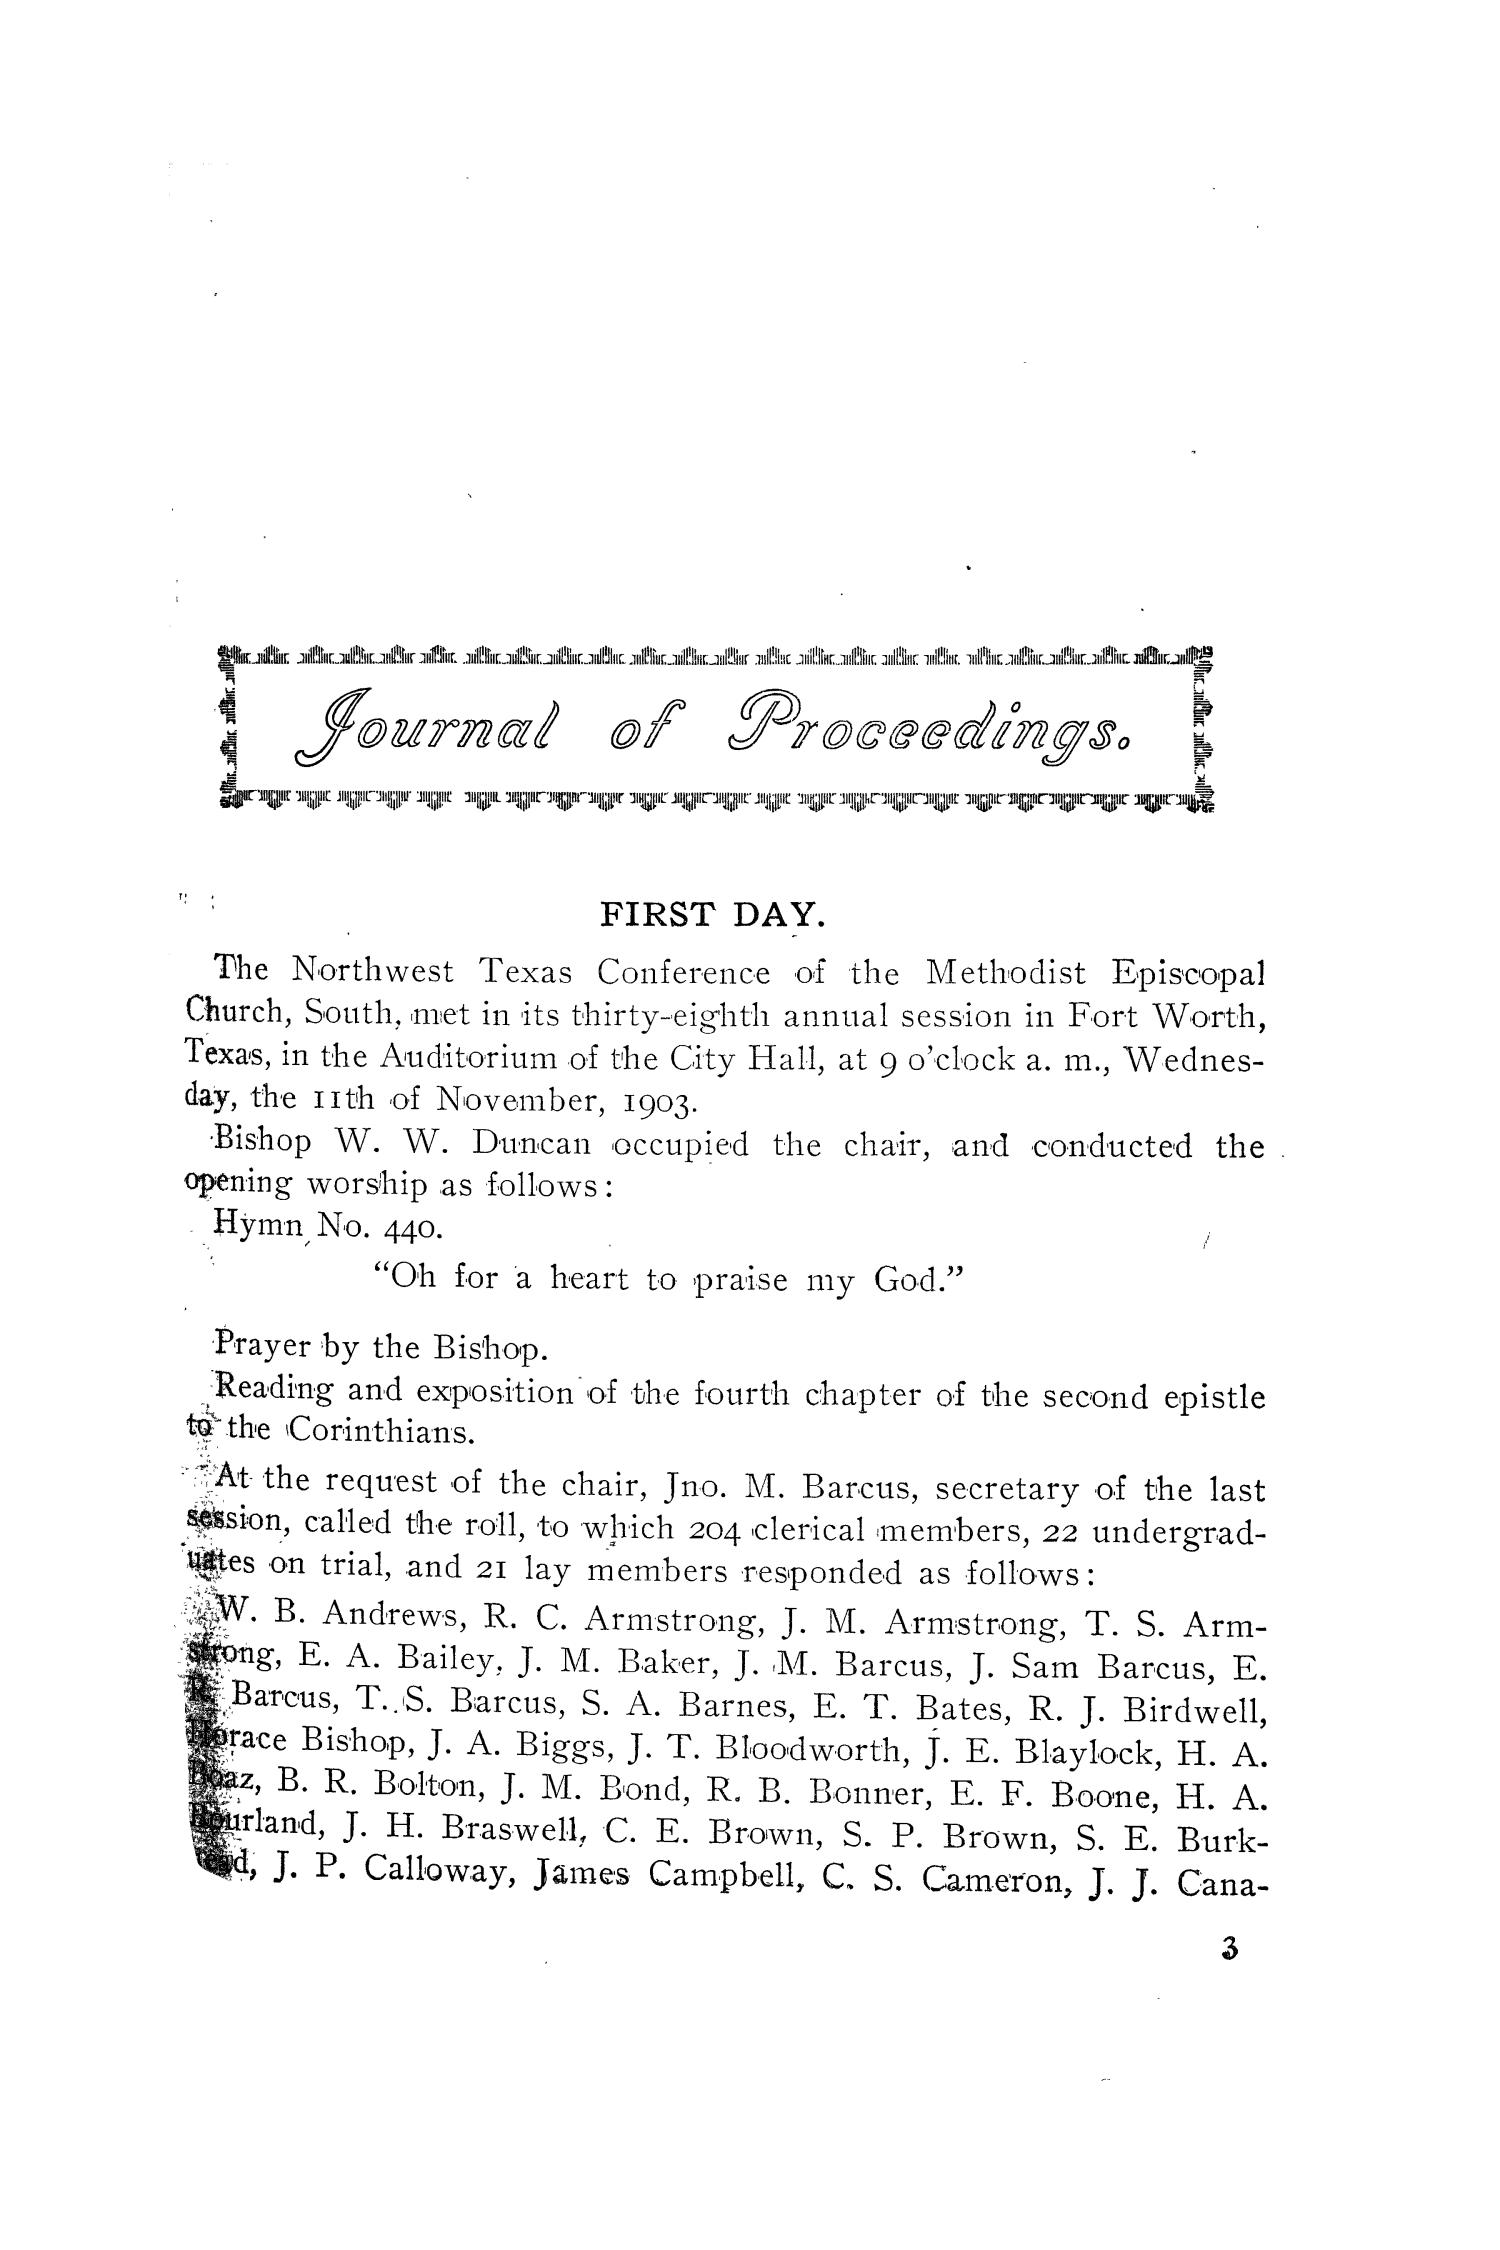 Journal of Proceedings of the Thirty-Eighth Annual Session of The Northwest Texas Conference, of the Methodist Episcopal Church, South, at Forth Worth, Texas, November 11 to November 16, 1903.
                                                
                                                    3
                                                